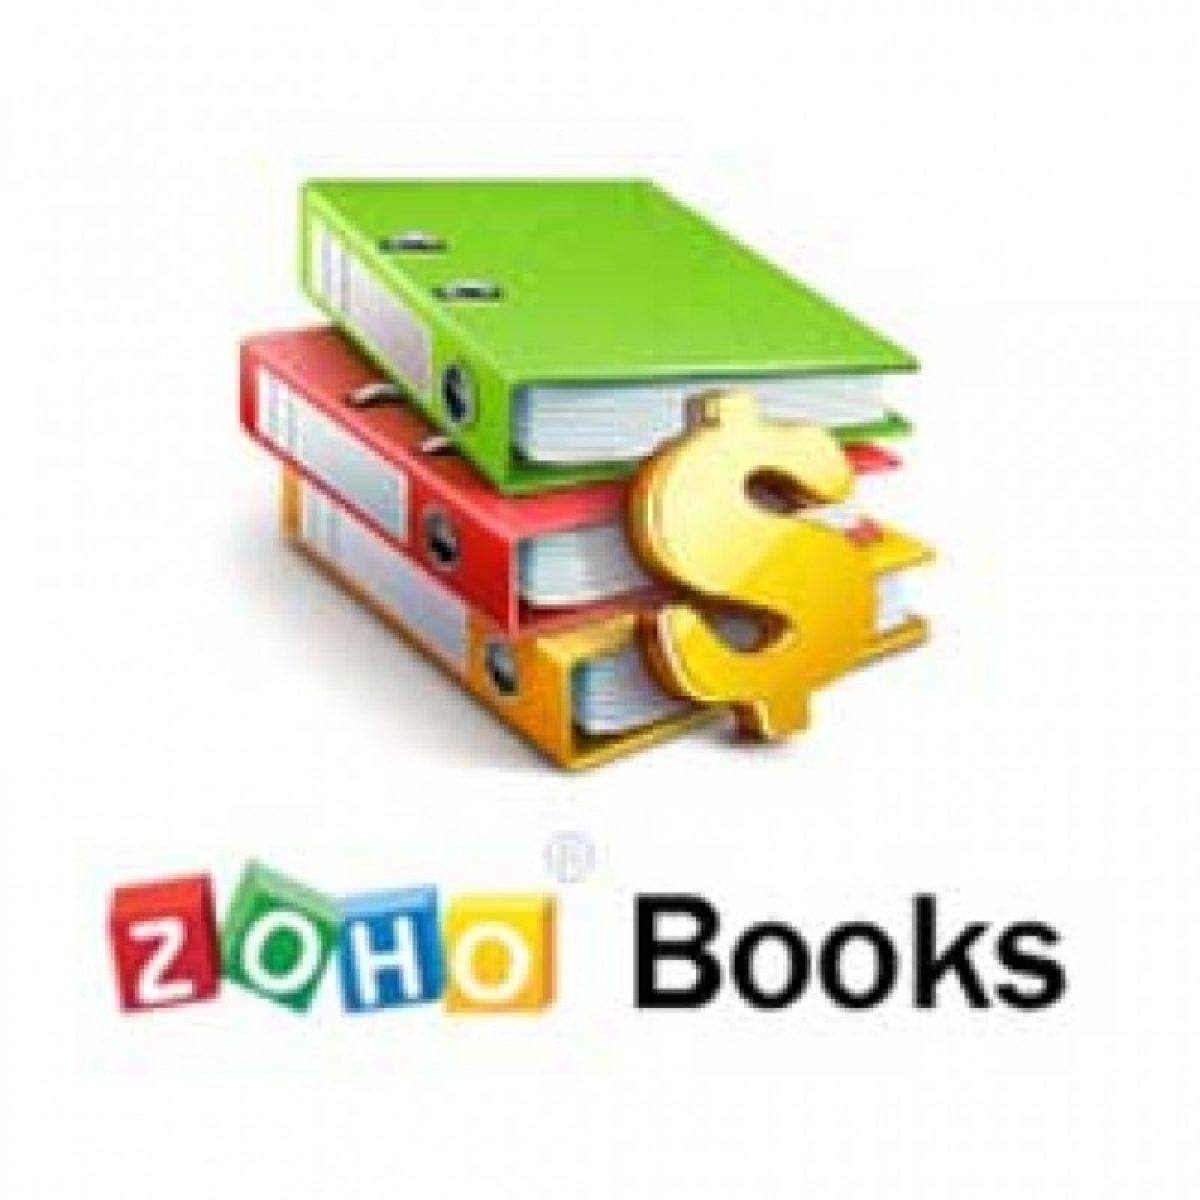 Accounts Junction and Zoho Books